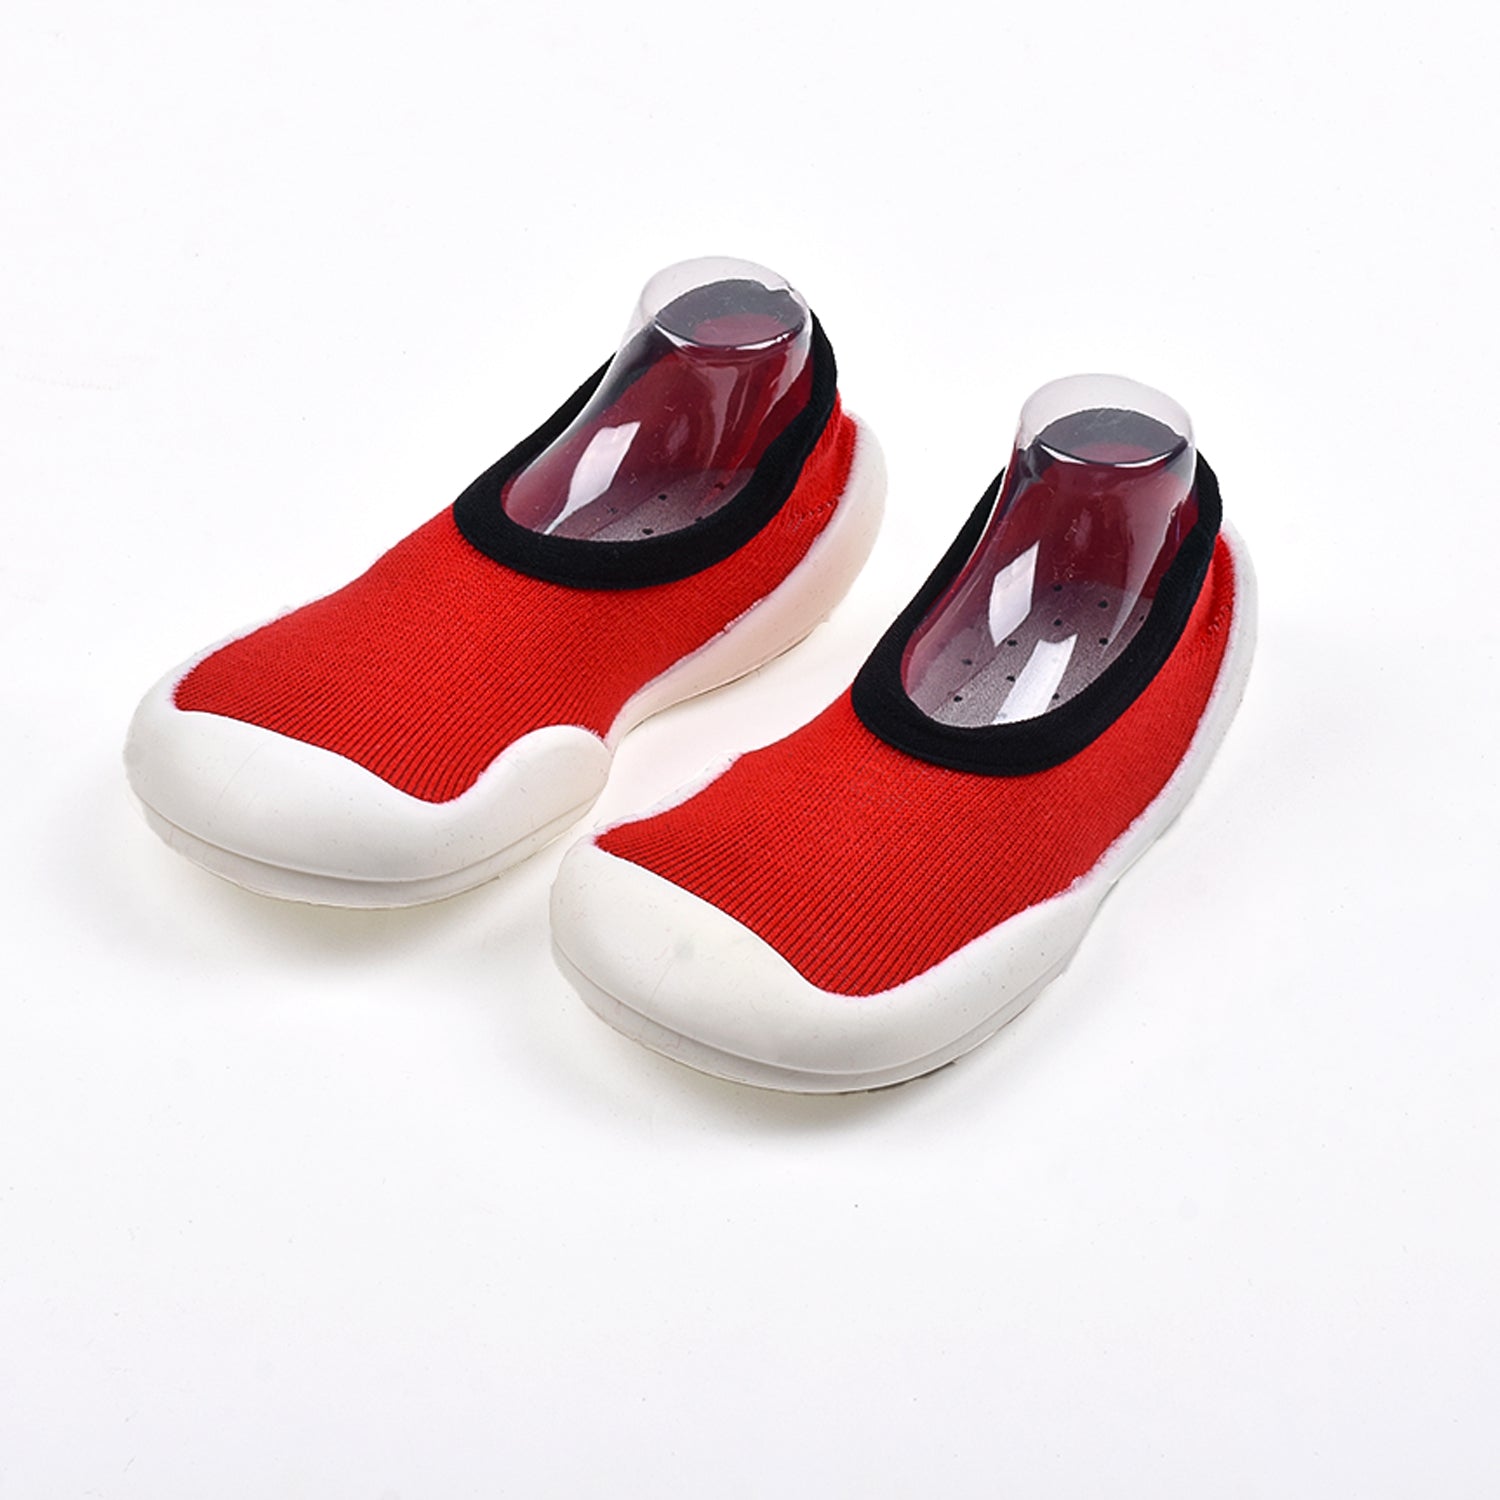 Baby Toddler Sock Shoes Soft Silicone Sole Shoes Breathable Cotton Shoes Anti-Slip for Kids Baby (Red)